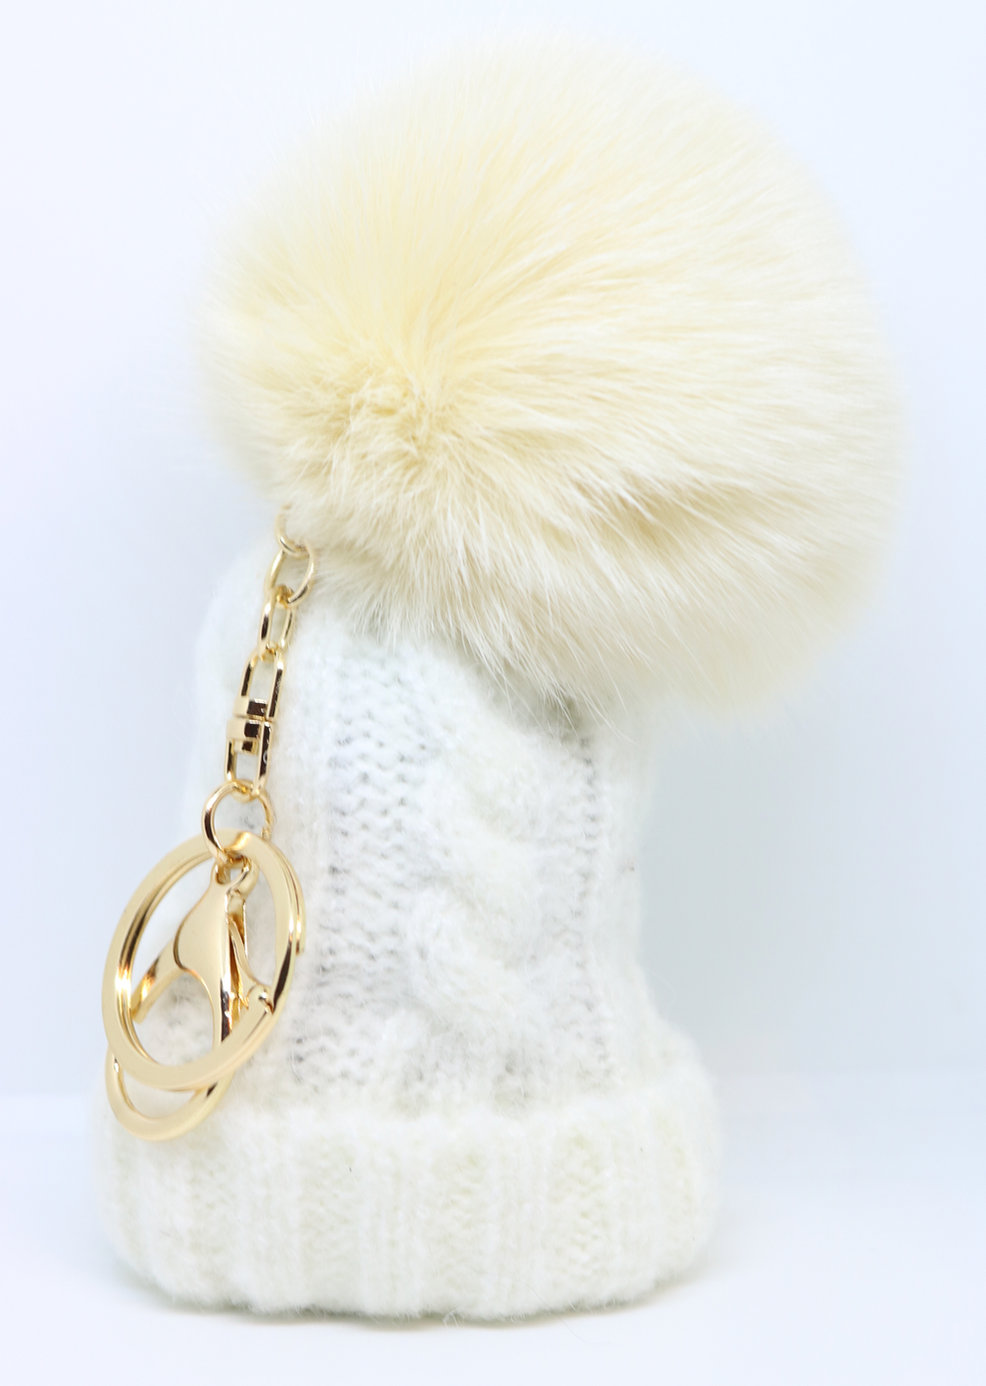 Limited Edition Bobble Hat Pom Pom Key Ring in Green or White - By Feathers Of Italy - Feathers Of Italy 